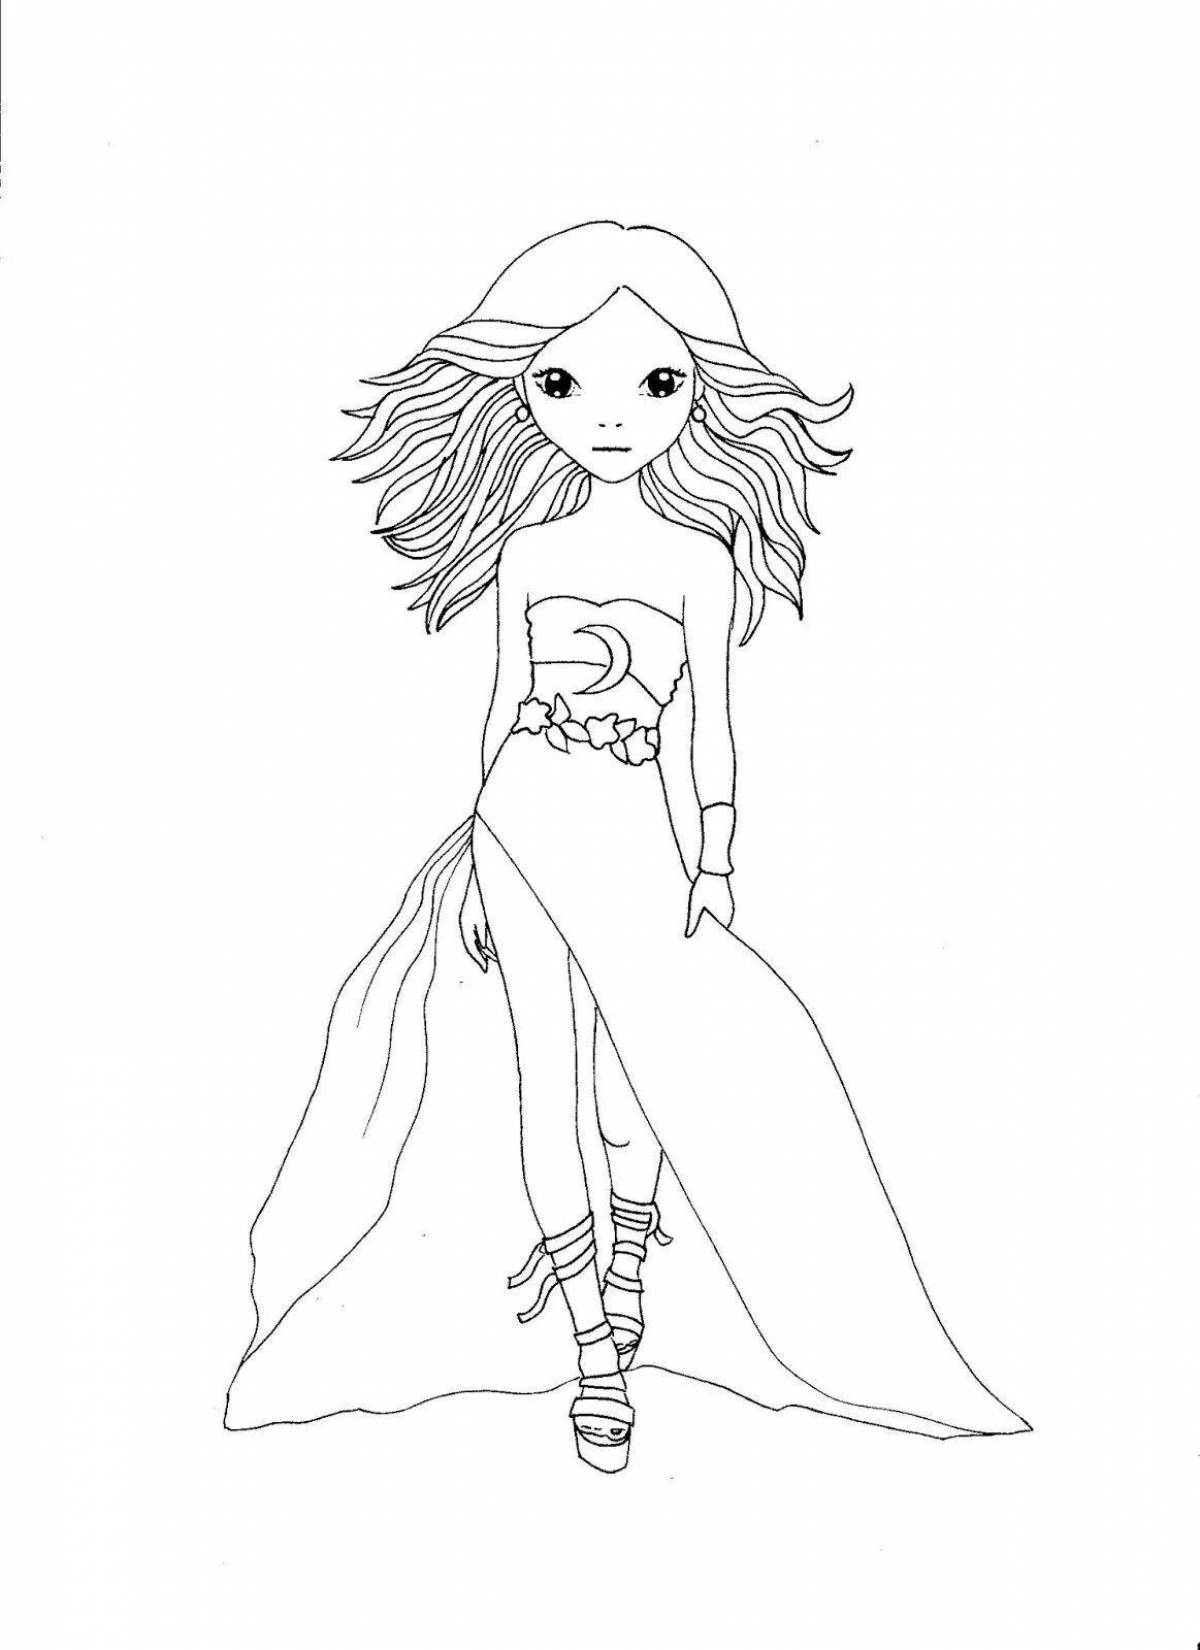 Glowing Top Model magazine coloring page